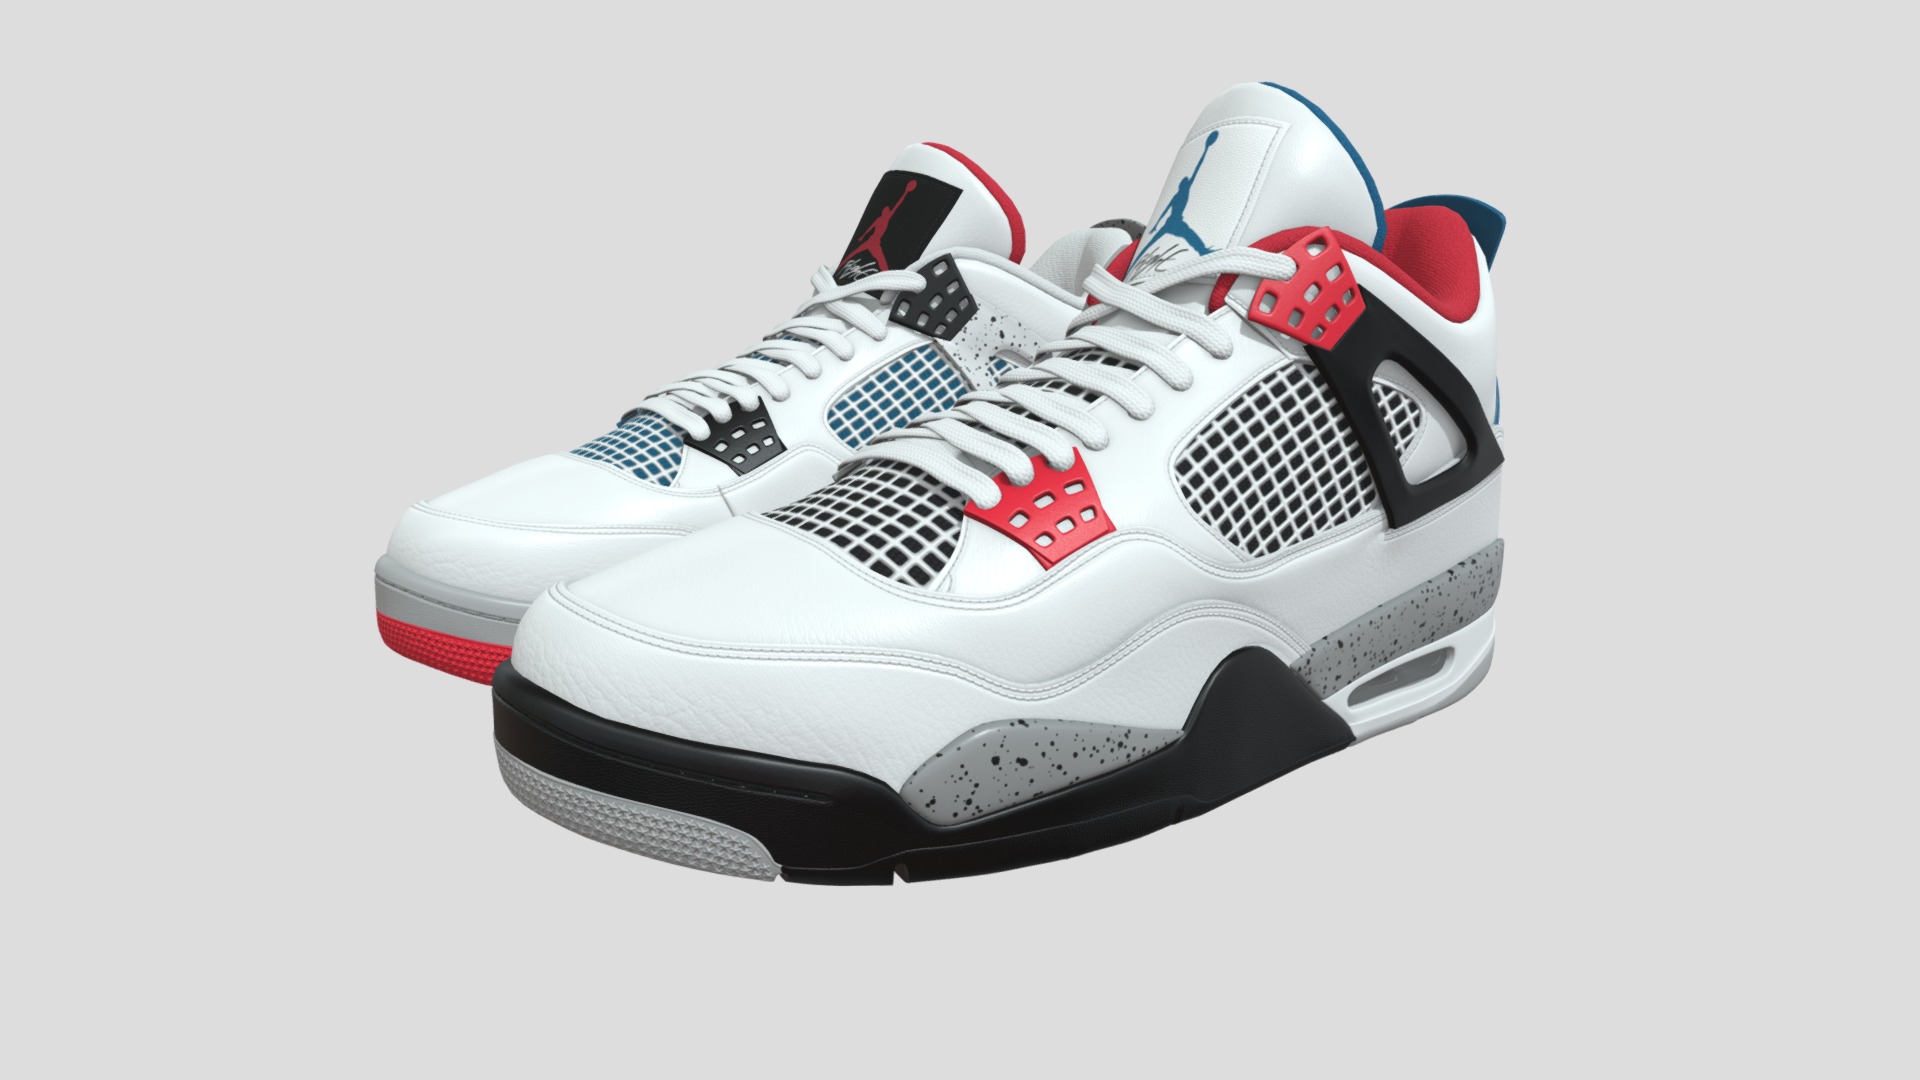 3D model Air Jordan 4 Retro What The - This is a 3D model of the Air Jordan 4 Retro What The. The 3D model is about a pair of white and red sneakers.